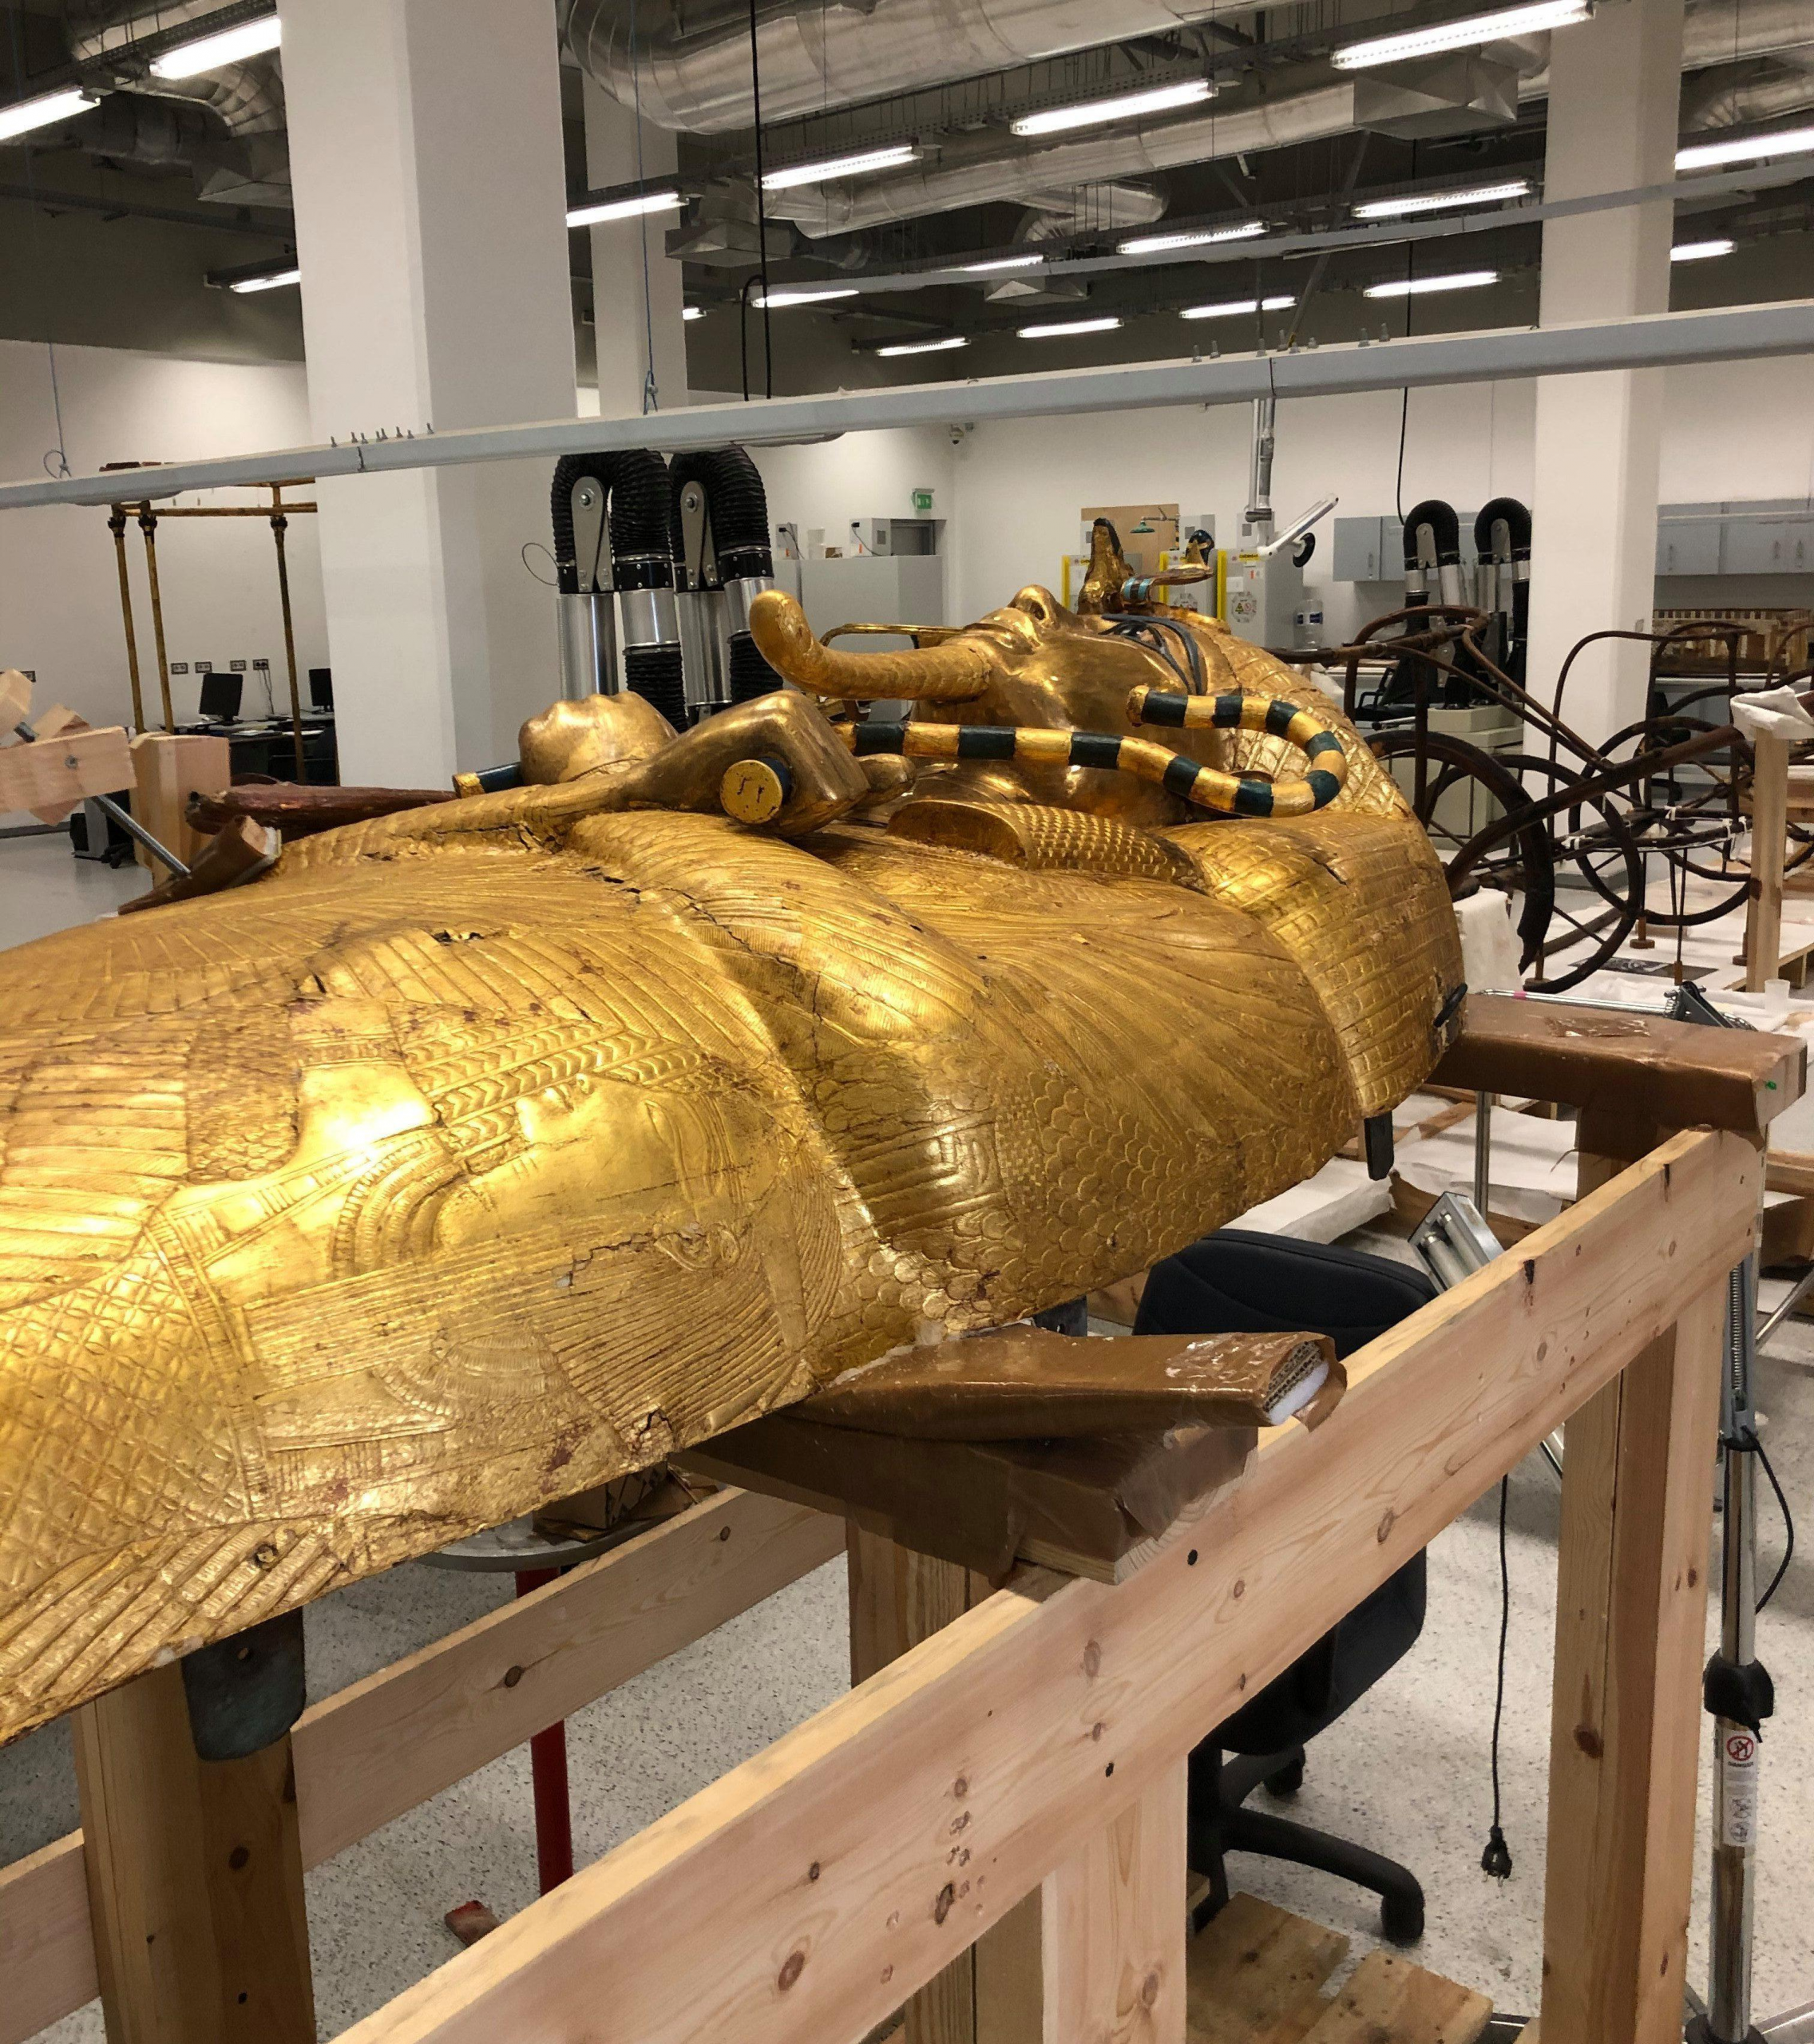 "Exploring the Grand Egyptian Museum: Where Tutankhamun's Coffin, Sealed for Thousands of Years, and Rare Ancient Treasures are Kept." - news.tinnhanhtv.com